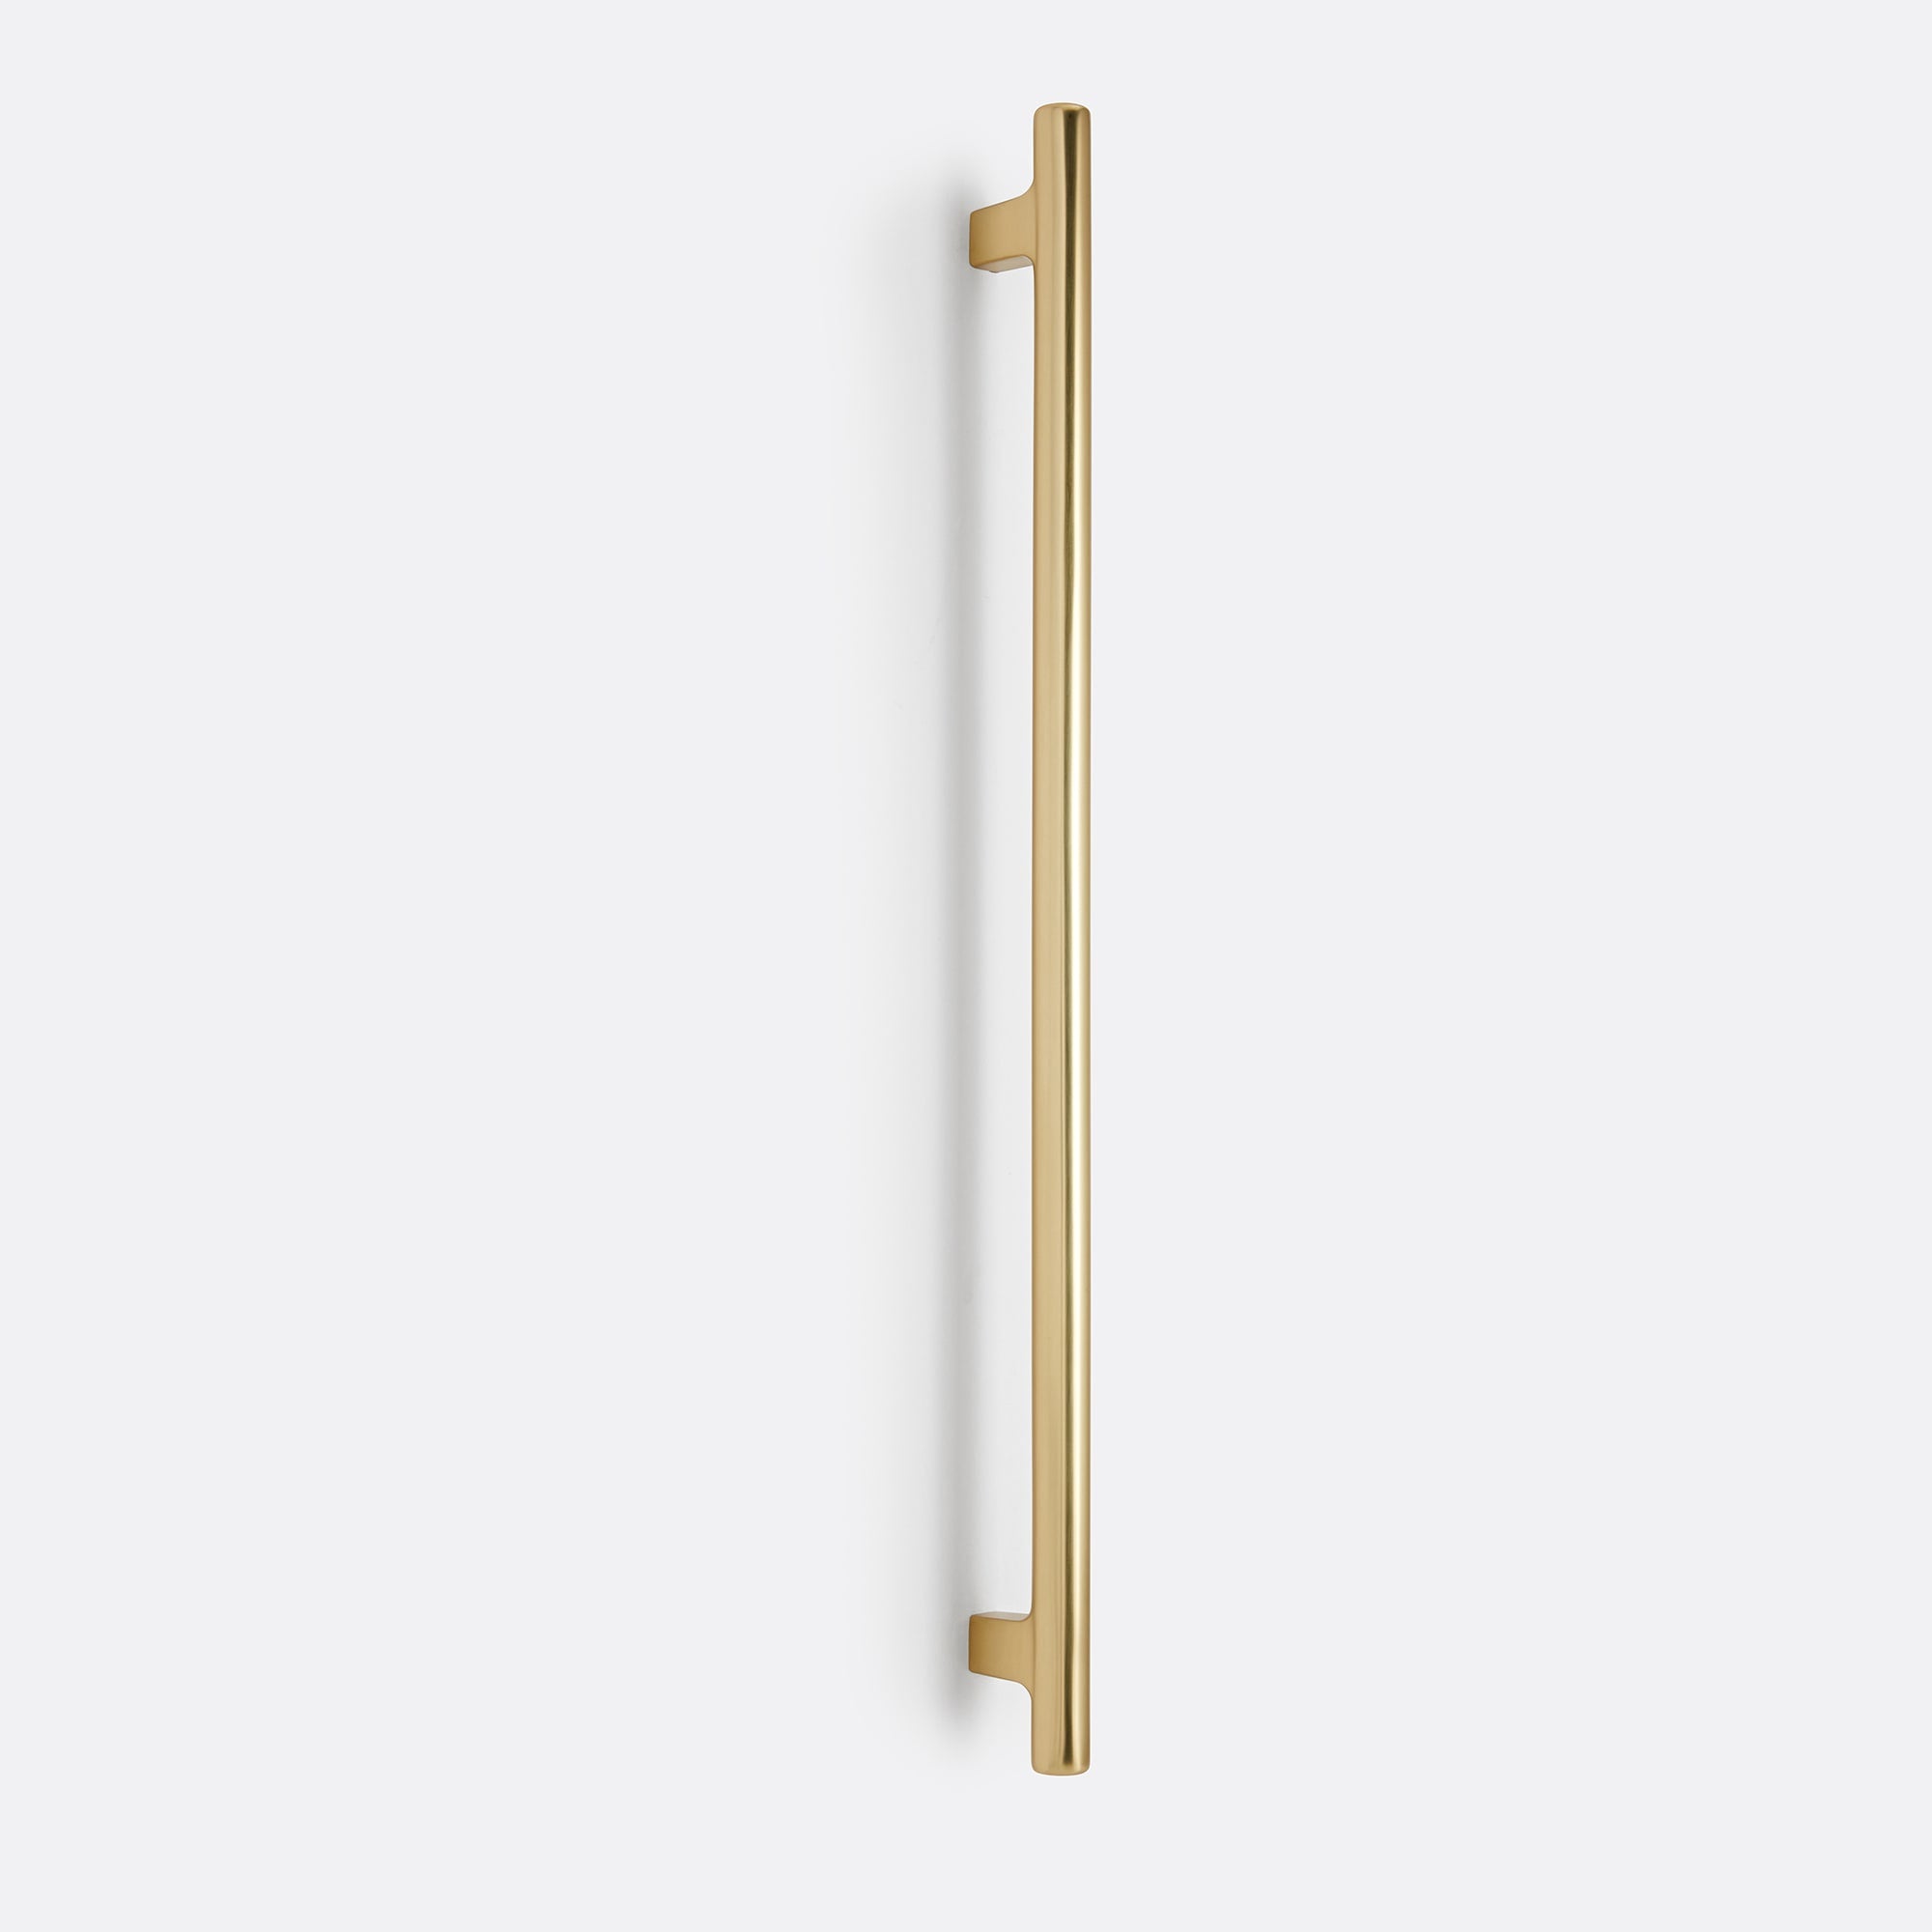 Allenglade Appliance Pull by Rejuvenation 18" / Aged Brass